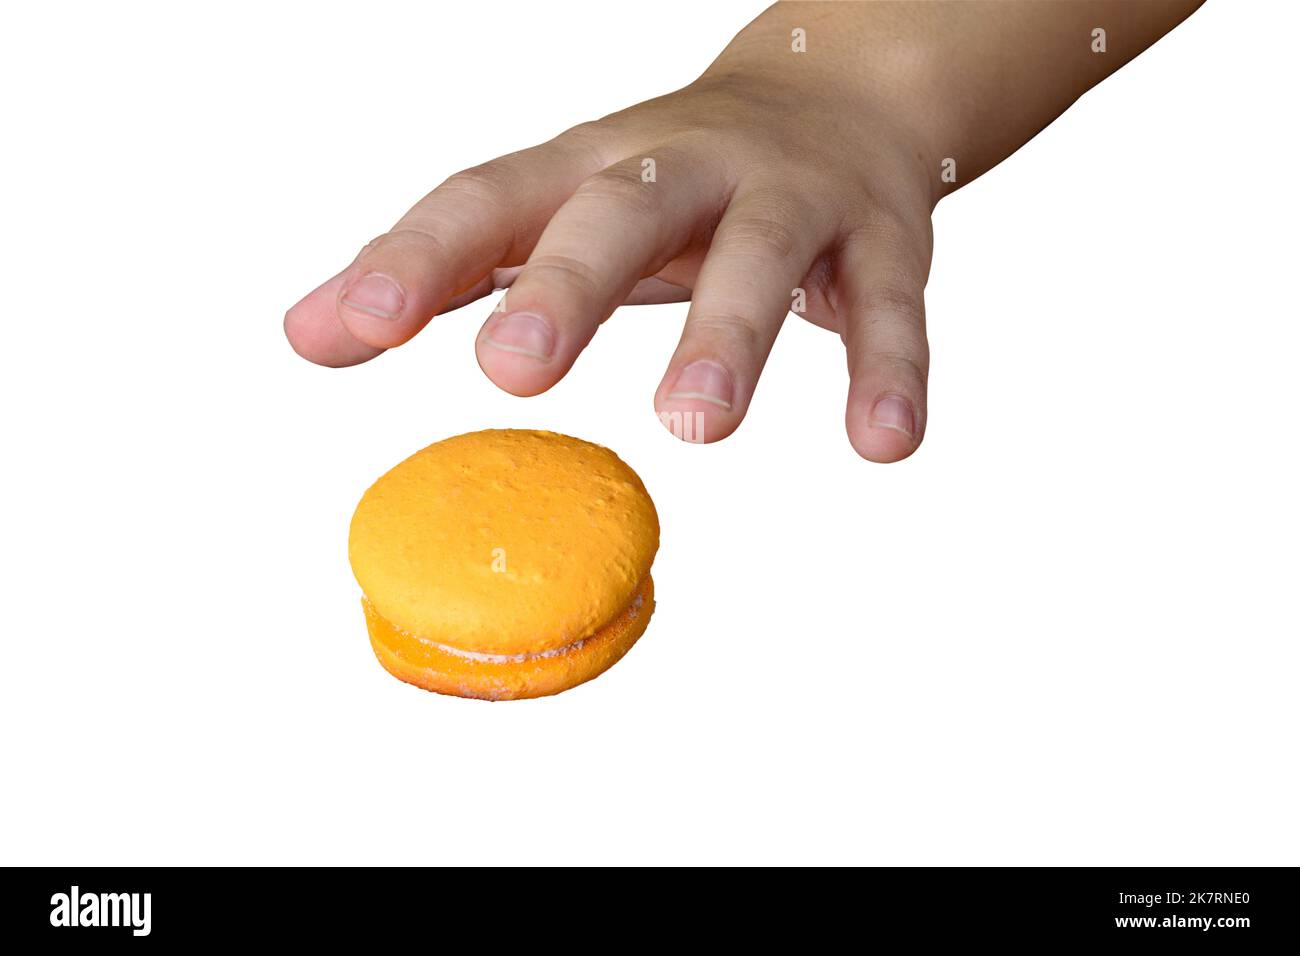 Child's hand going to pick up a yellow macaron (white background). Stock Photo